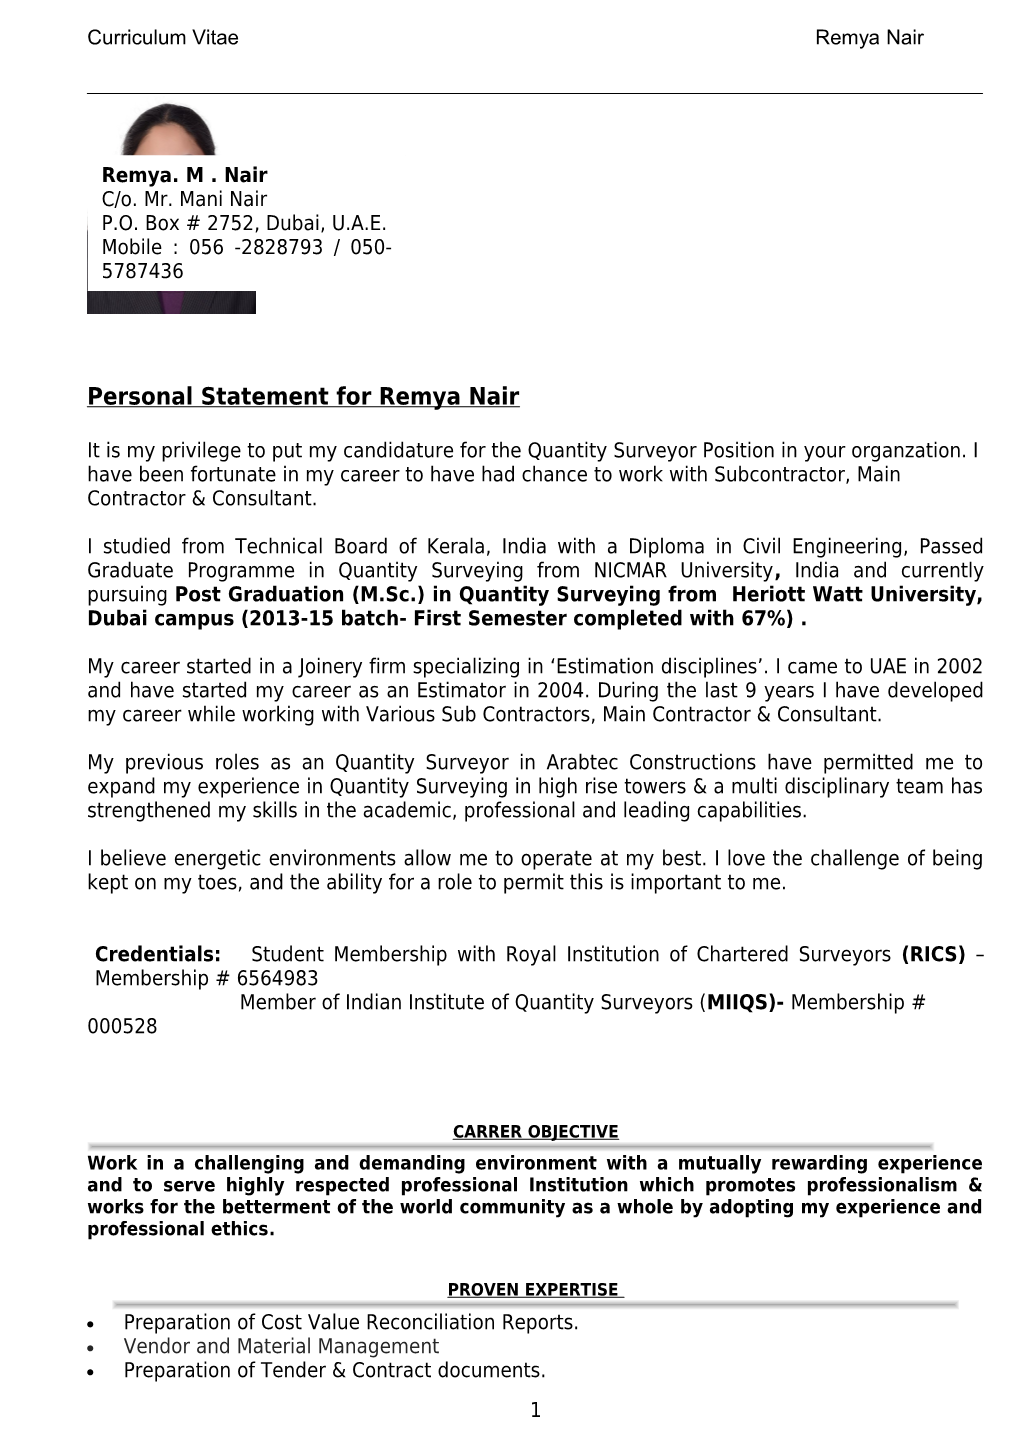 Personal Statement for Remya Nair